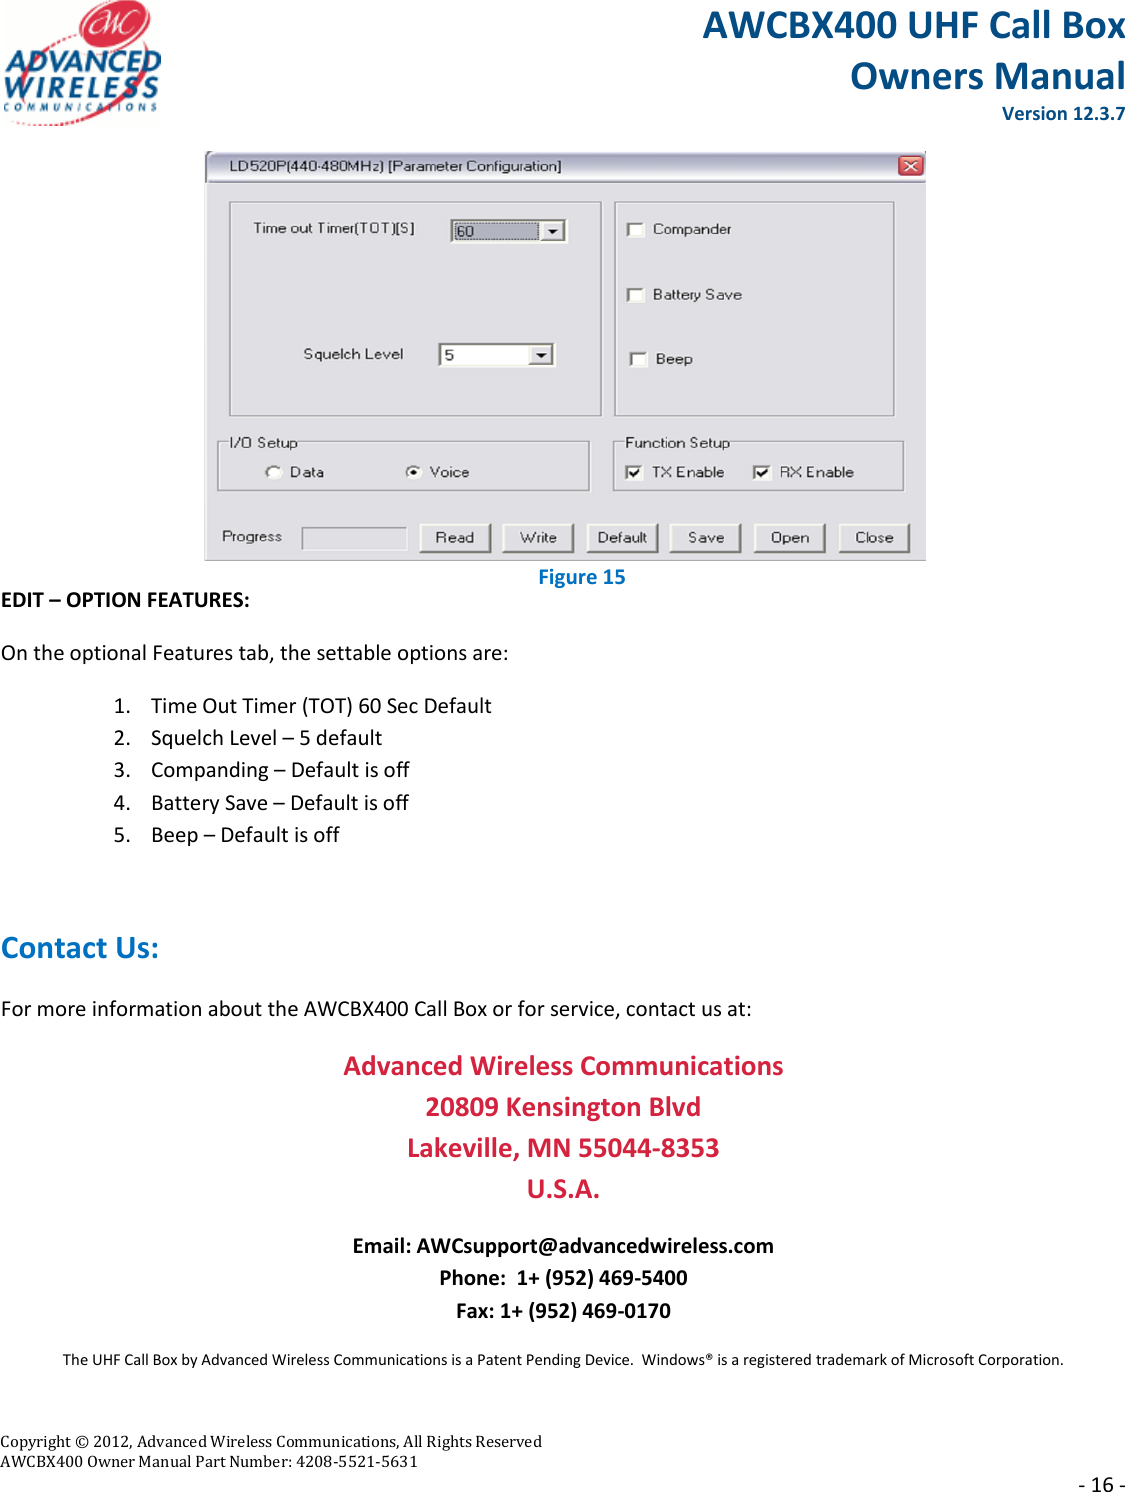 AWCBX400 UHF Call Box Owners Manual  Version 12.3.7   Copyright © 2012, Advanced Wireless Communications, All Rights Reserved  AWCBX400 Owner Manual Part Number: 4208-5521-5631     - 16 -  EDIT – OPTION FEATURES: On the optional Features tab, the settable options are: 1. Time Out Timer (TOT) 60 Sec Default 2. Squelch Level – 5 default 3. Companding – Default is off 4. Battery Save – Default is off 5. Beep – Default is off  Contact Us: For more information about the AWCBX400 Call Box or for service, contact us at: Advanced Wireless Communications 20809 Kensington Blvd Lakeville, MN 55044-8353 U.S.A. Email: AWCsupport@advancedwireless.com Phone:  1+ (952) 469-5400 Fax: 1+ (952) 469-0170 The UHF Call Box by Advanced Wireless Communications is a Patent Pending Device.  Windows® is a registered trademark of Microsoft Corporation.  Figure 15 Figure 15 